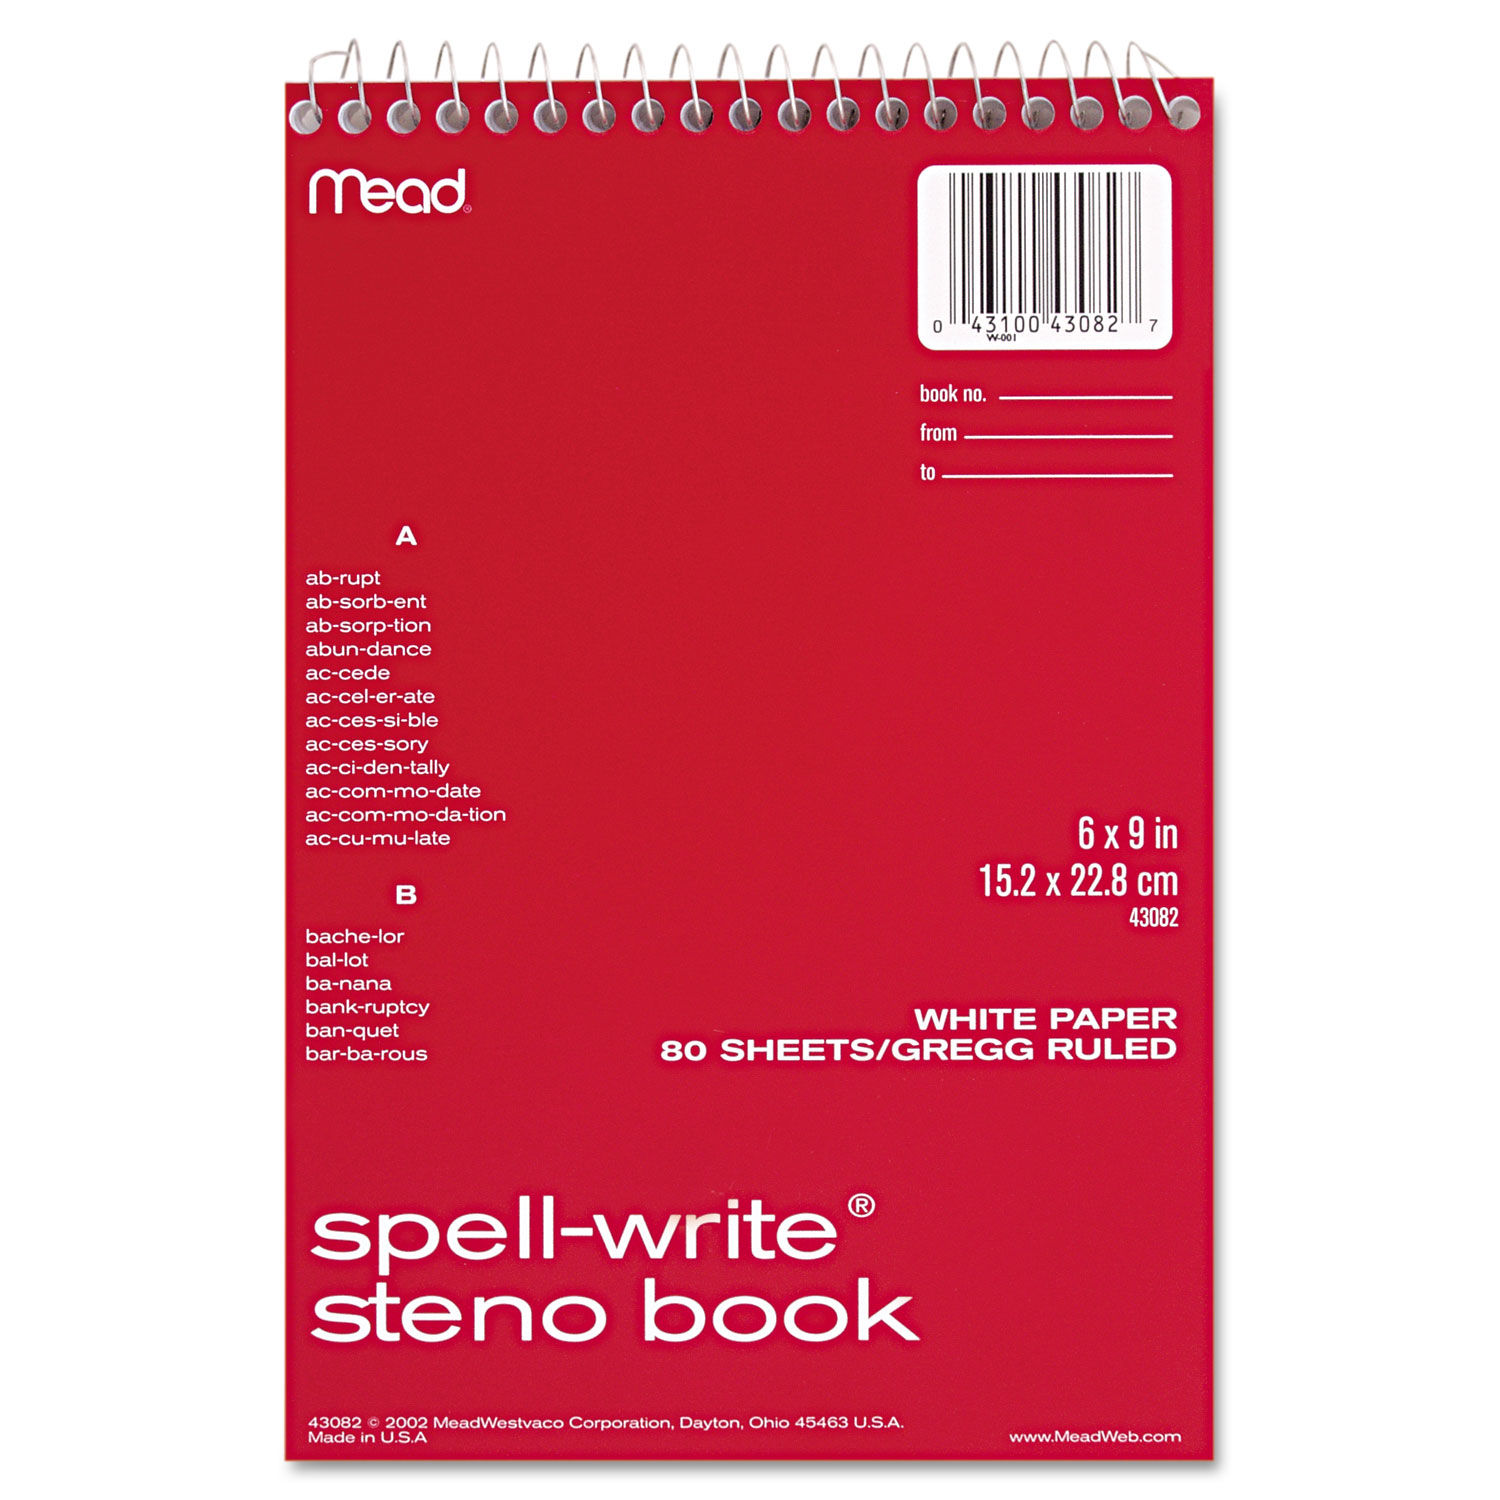 Spell-Write Wirebound Steno Pad Gregg Rule, Randomly Assorted Cover Colors, 80 White 6 x 9 Sheets